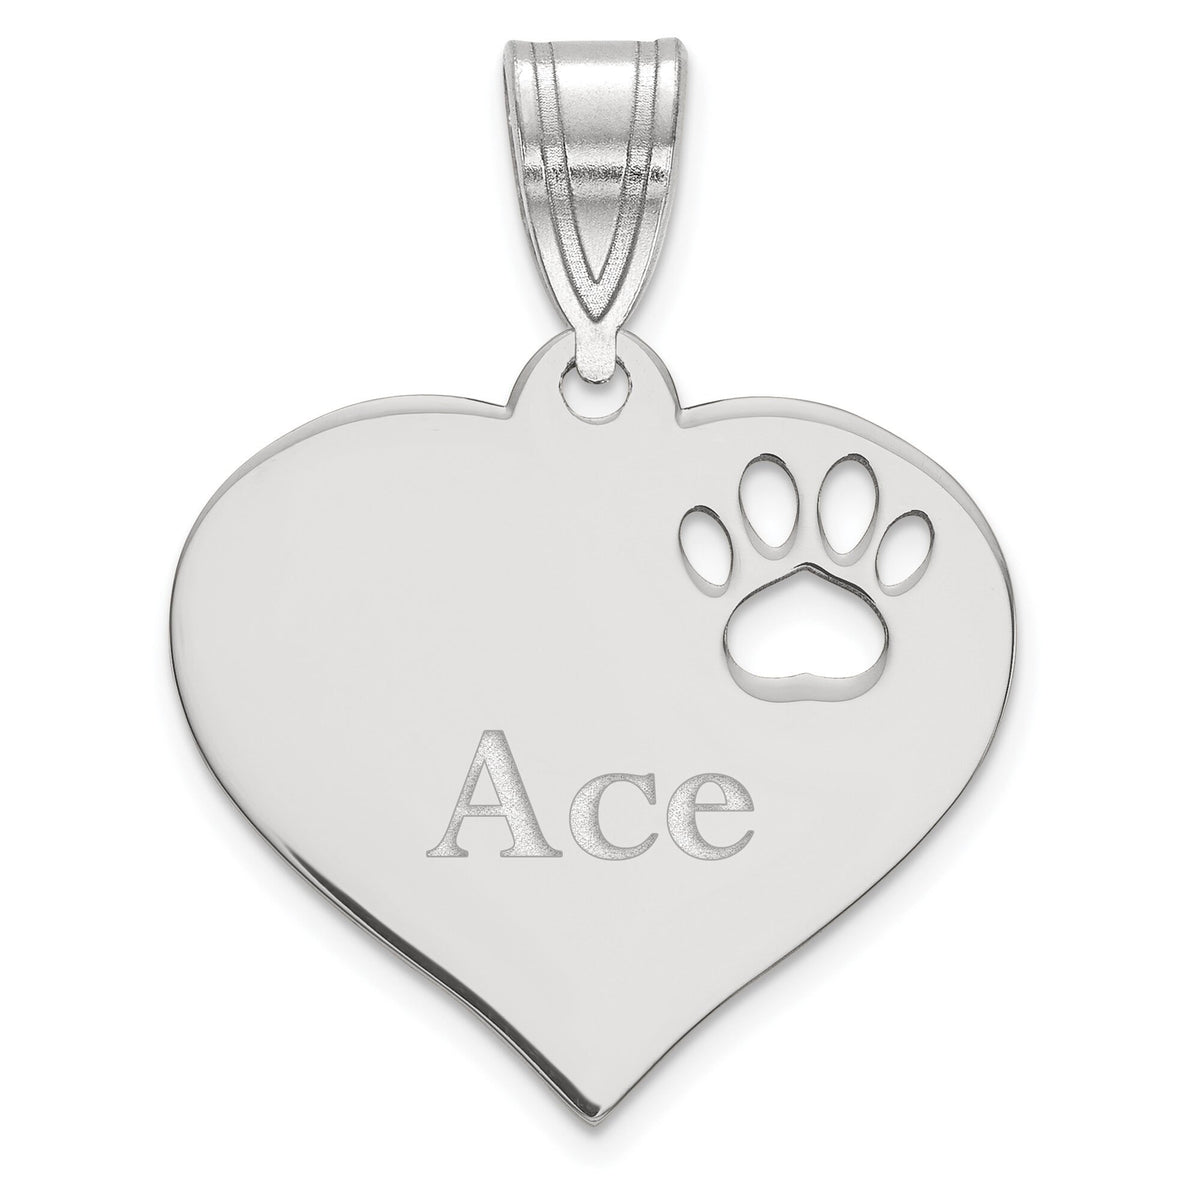 Personalized Paw Cut Out Pendant With Necklace in Sterling Silver ,Gold Plated Silver or 10k Gold Dog Necklace Fur Baby Jewelry Cat Necklace